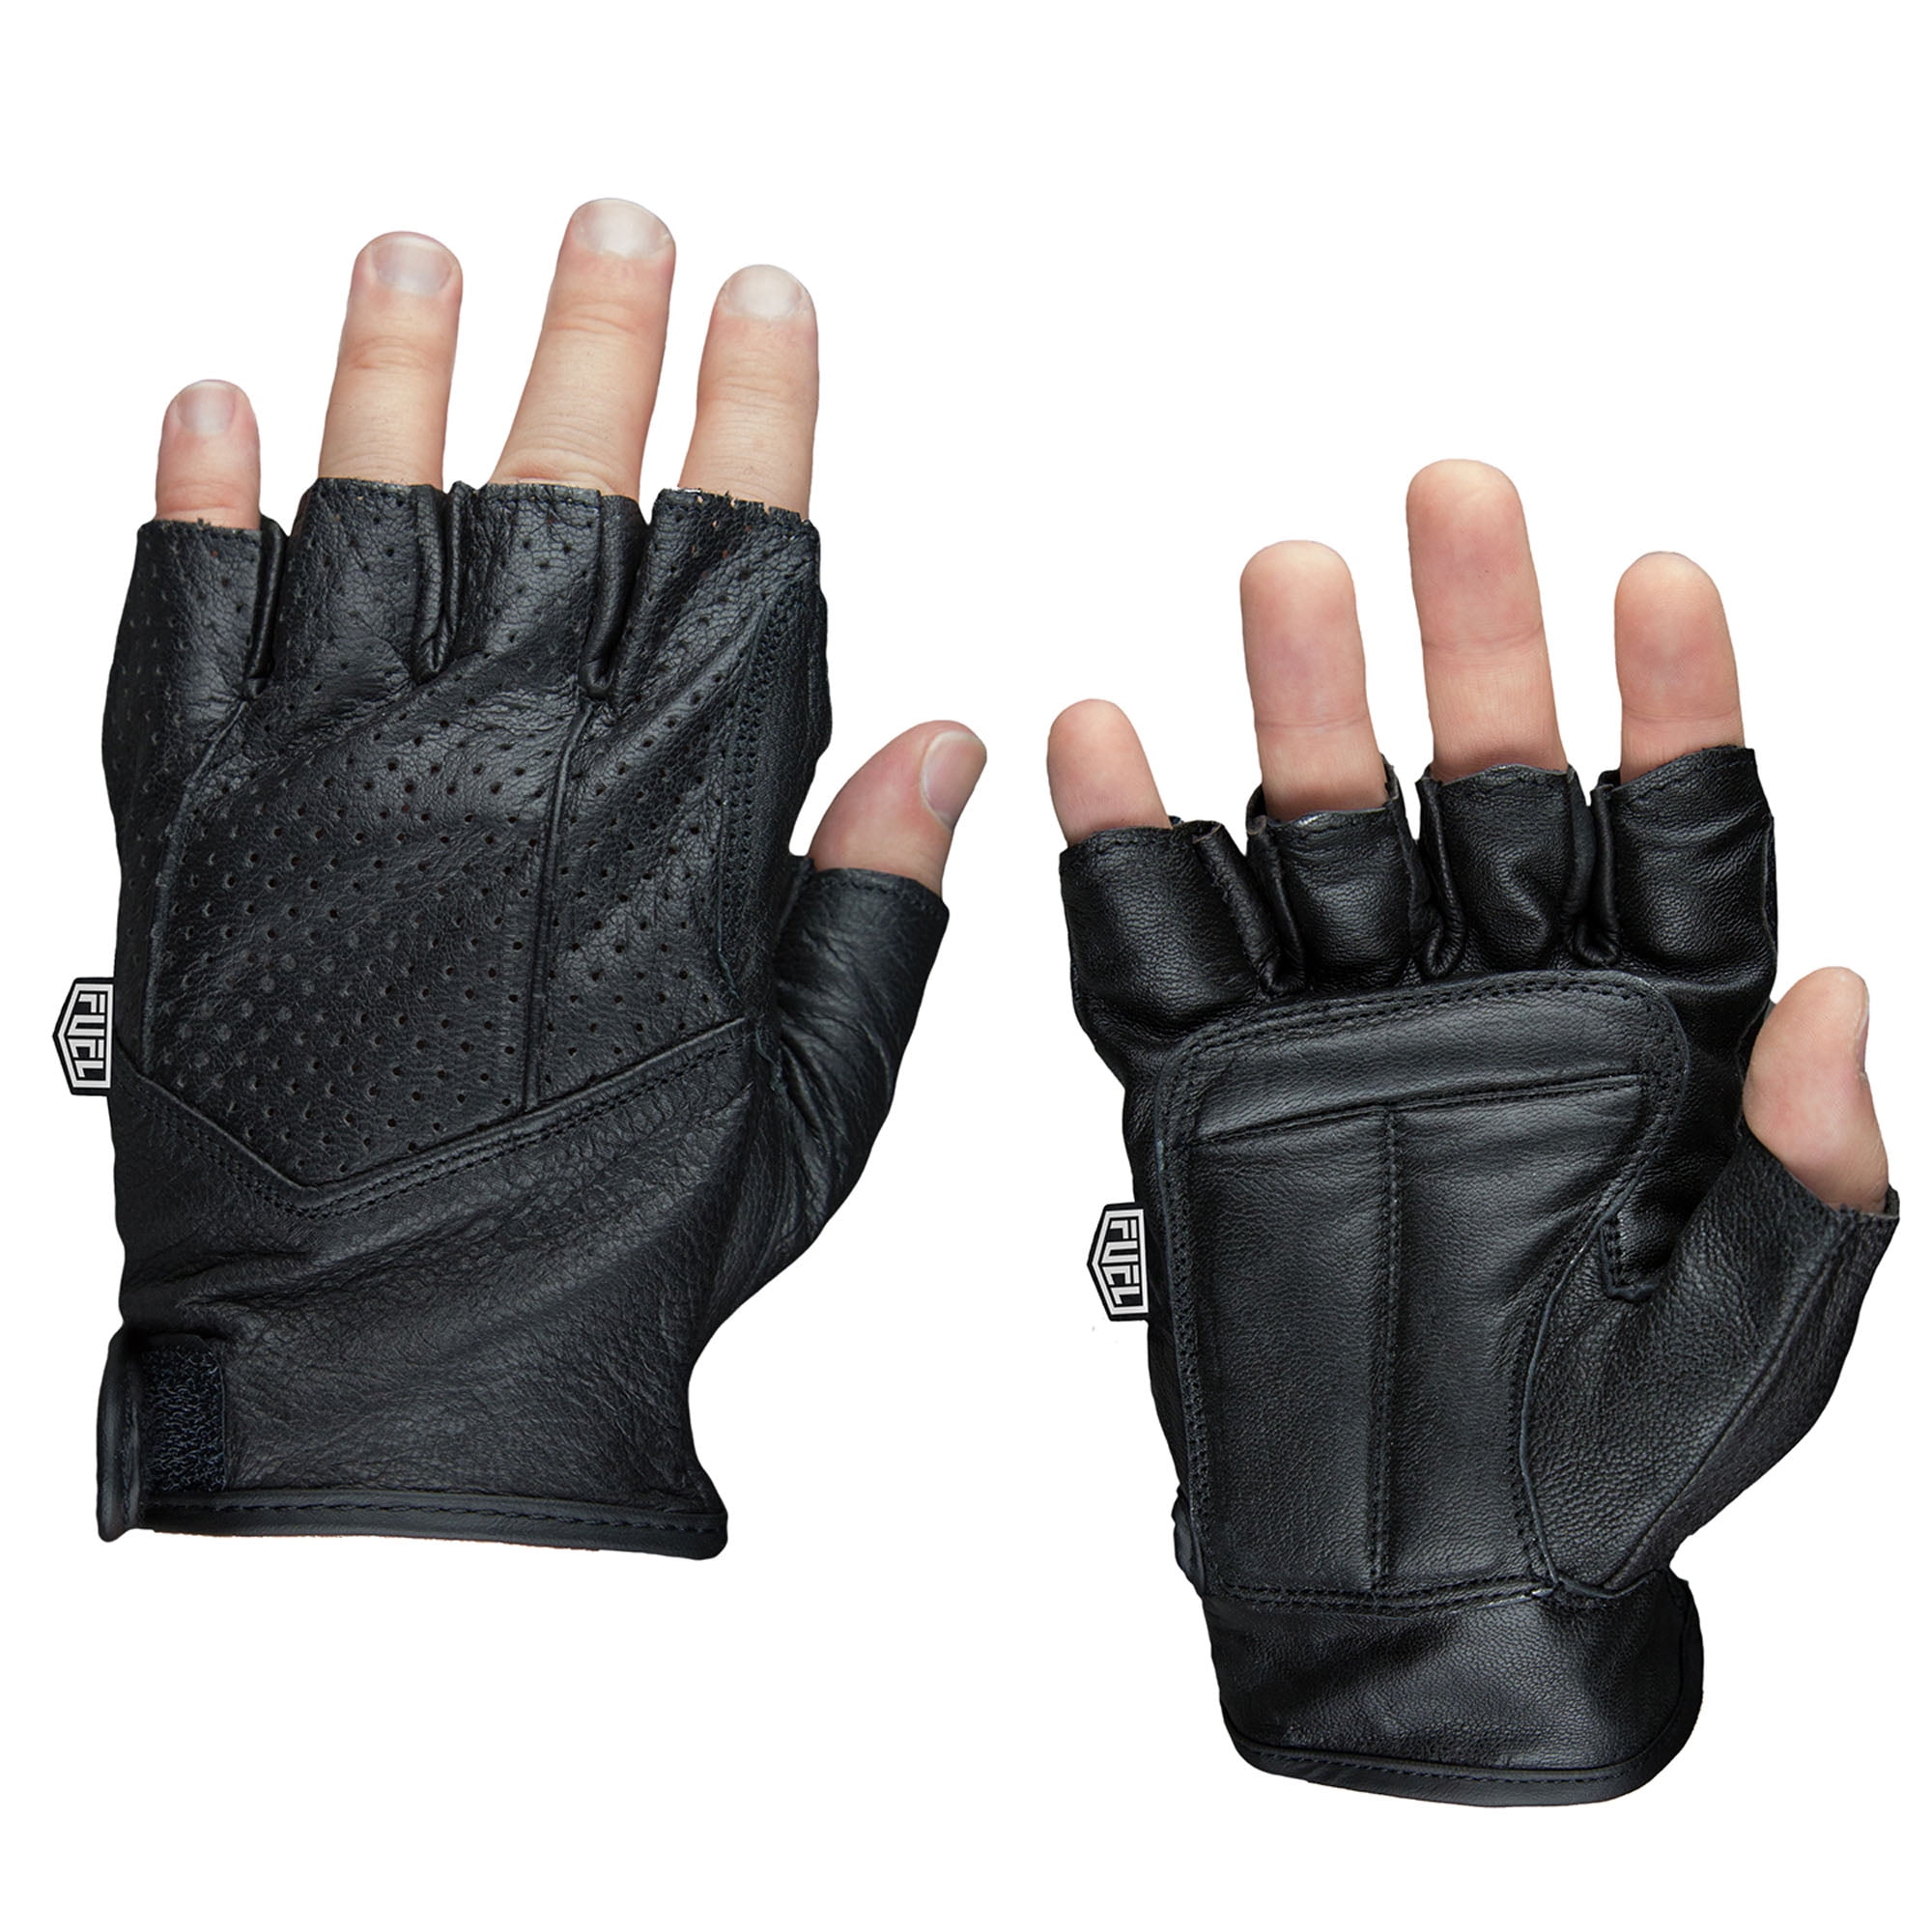 MA7 MOTORCYCLE GENUINE LEATHER RACING DRIVING RIDING GLOVES w/ GEL PADDING